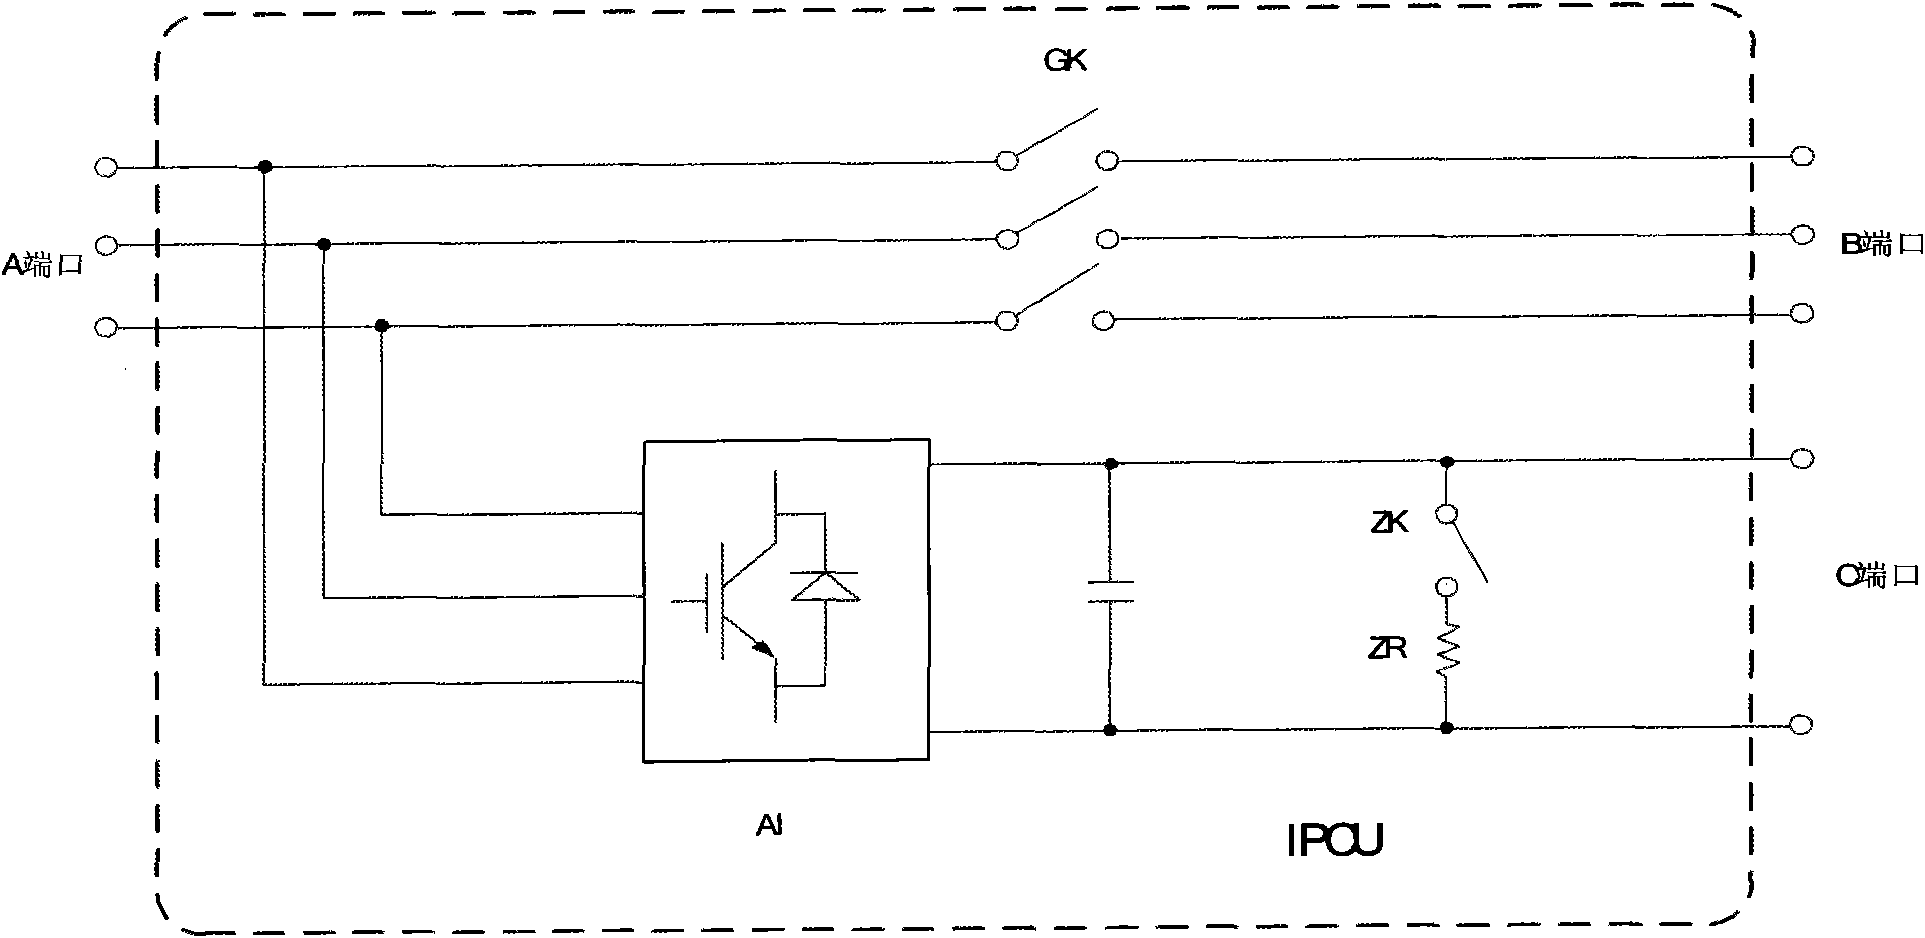 Intelligent power control unit for low voltage ride through and application thereof